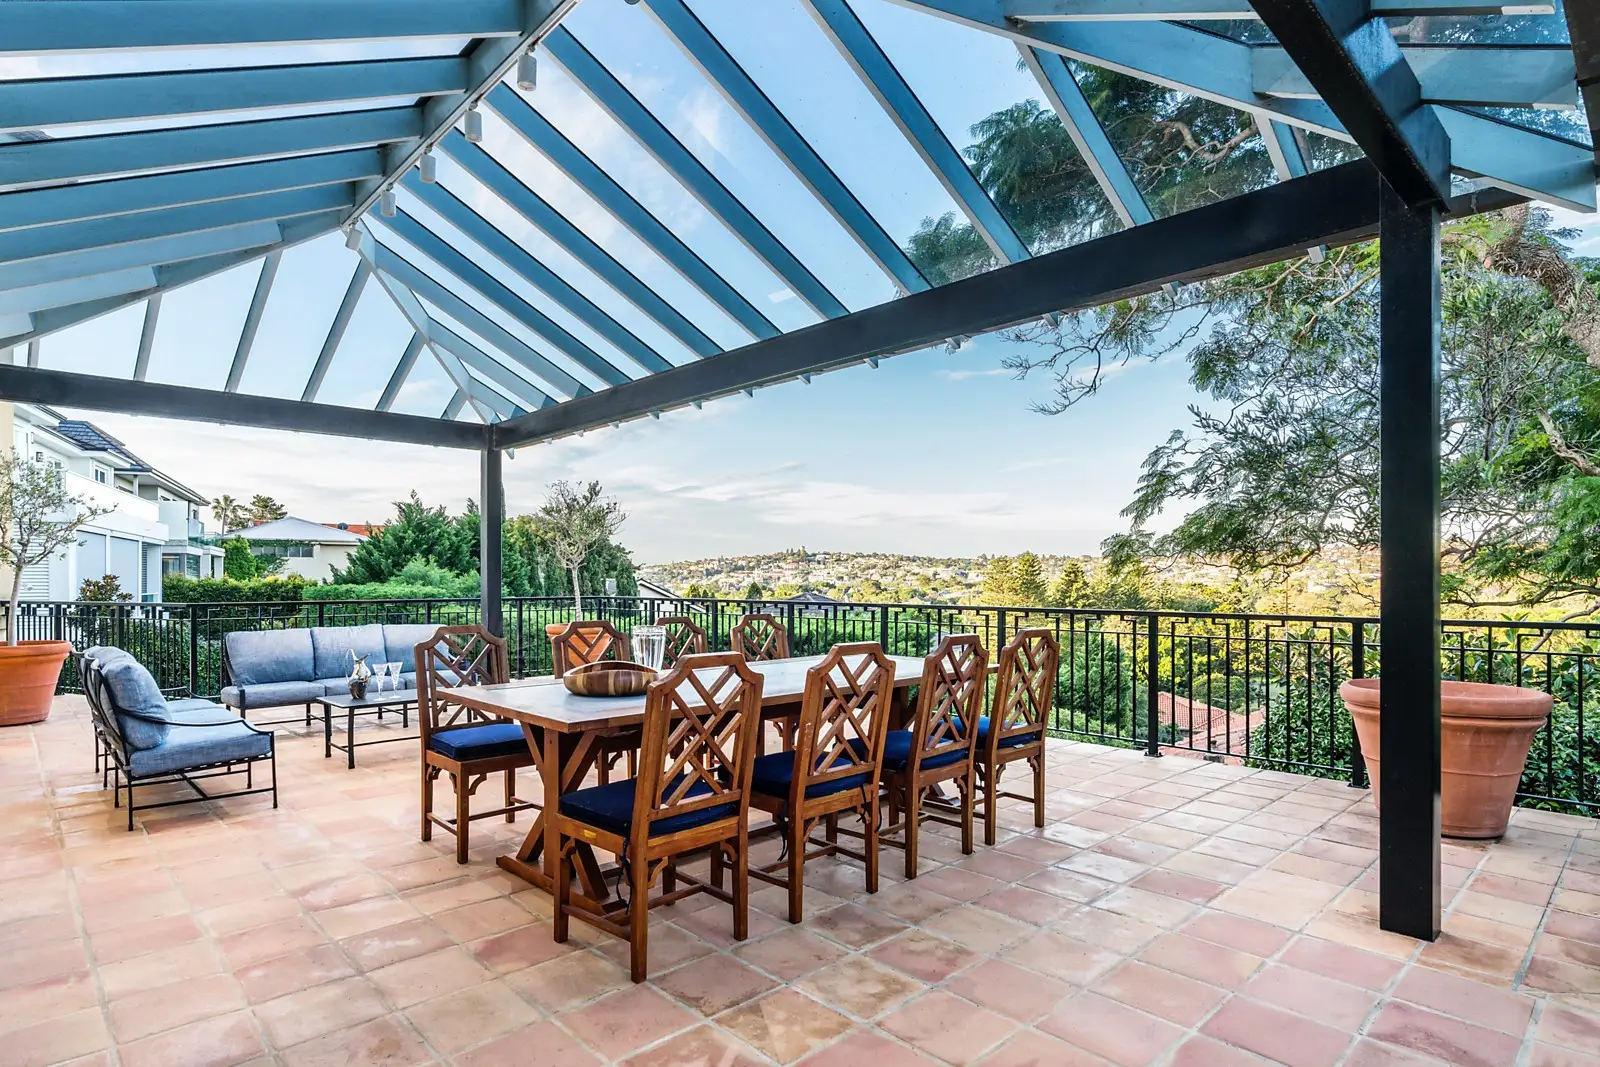 Photo #1: 1A Bunyula Road, Bellevue Hill - Sold by Sydney Sotheby's International Realty